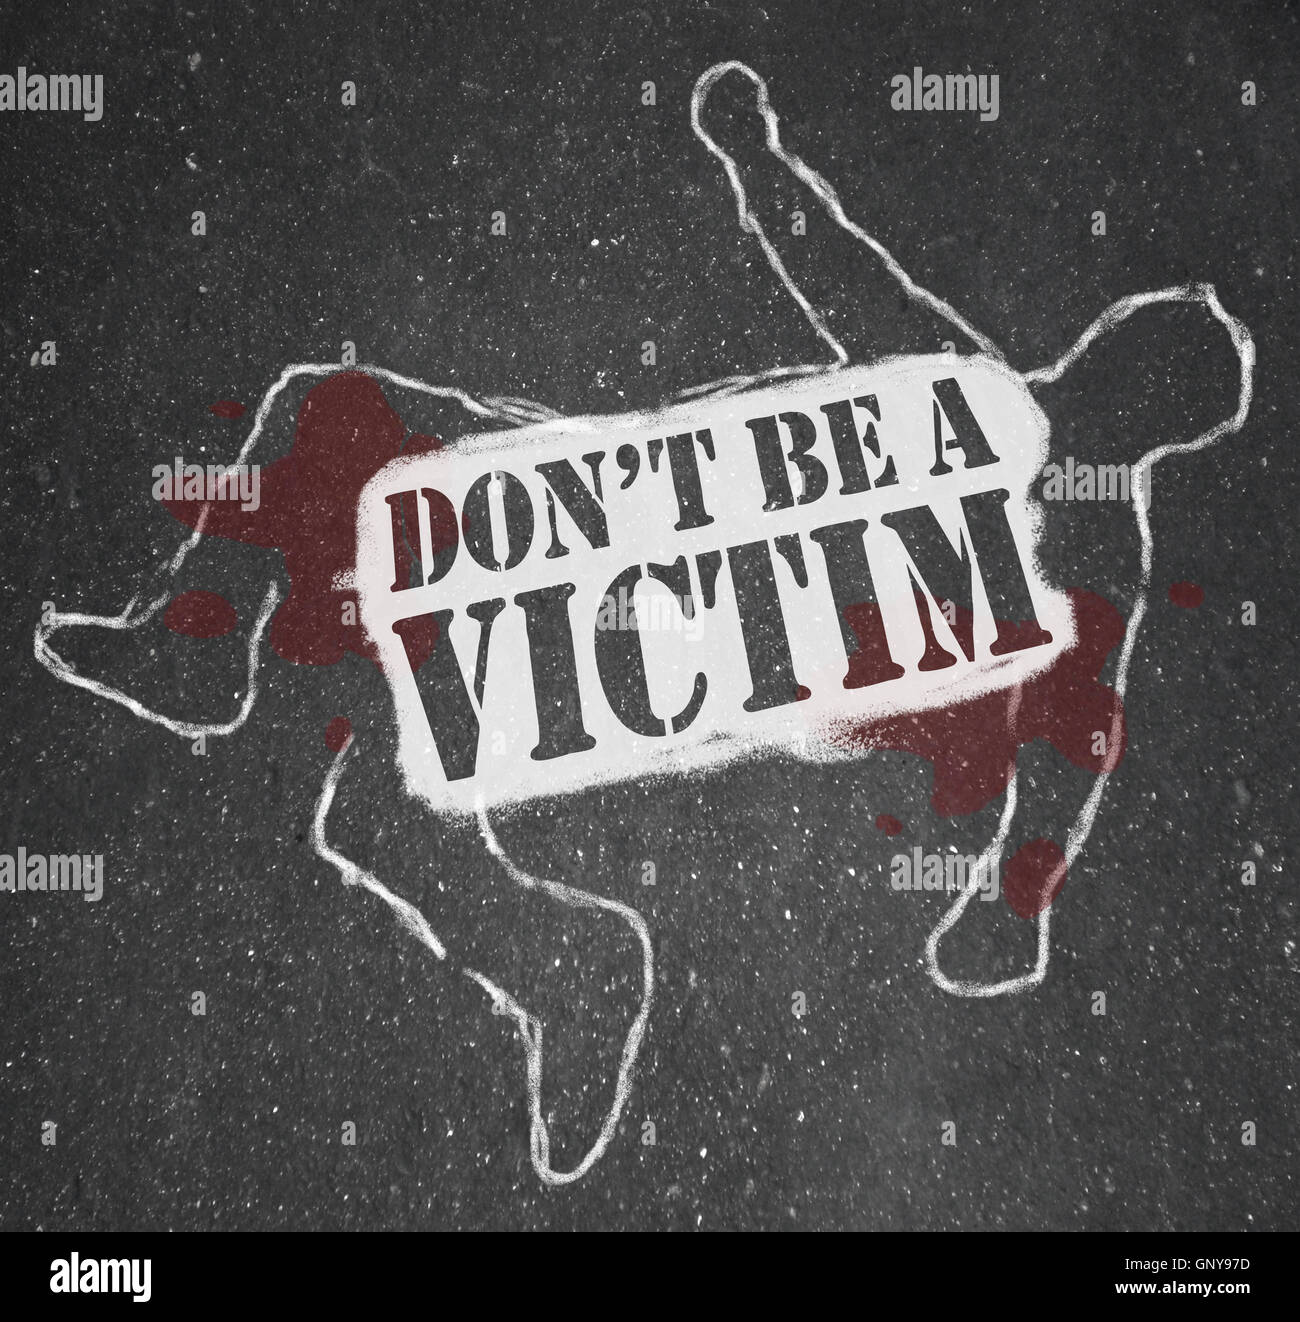 Don't Be a Victim Chalk Outline Crime Prevention Stock Photo